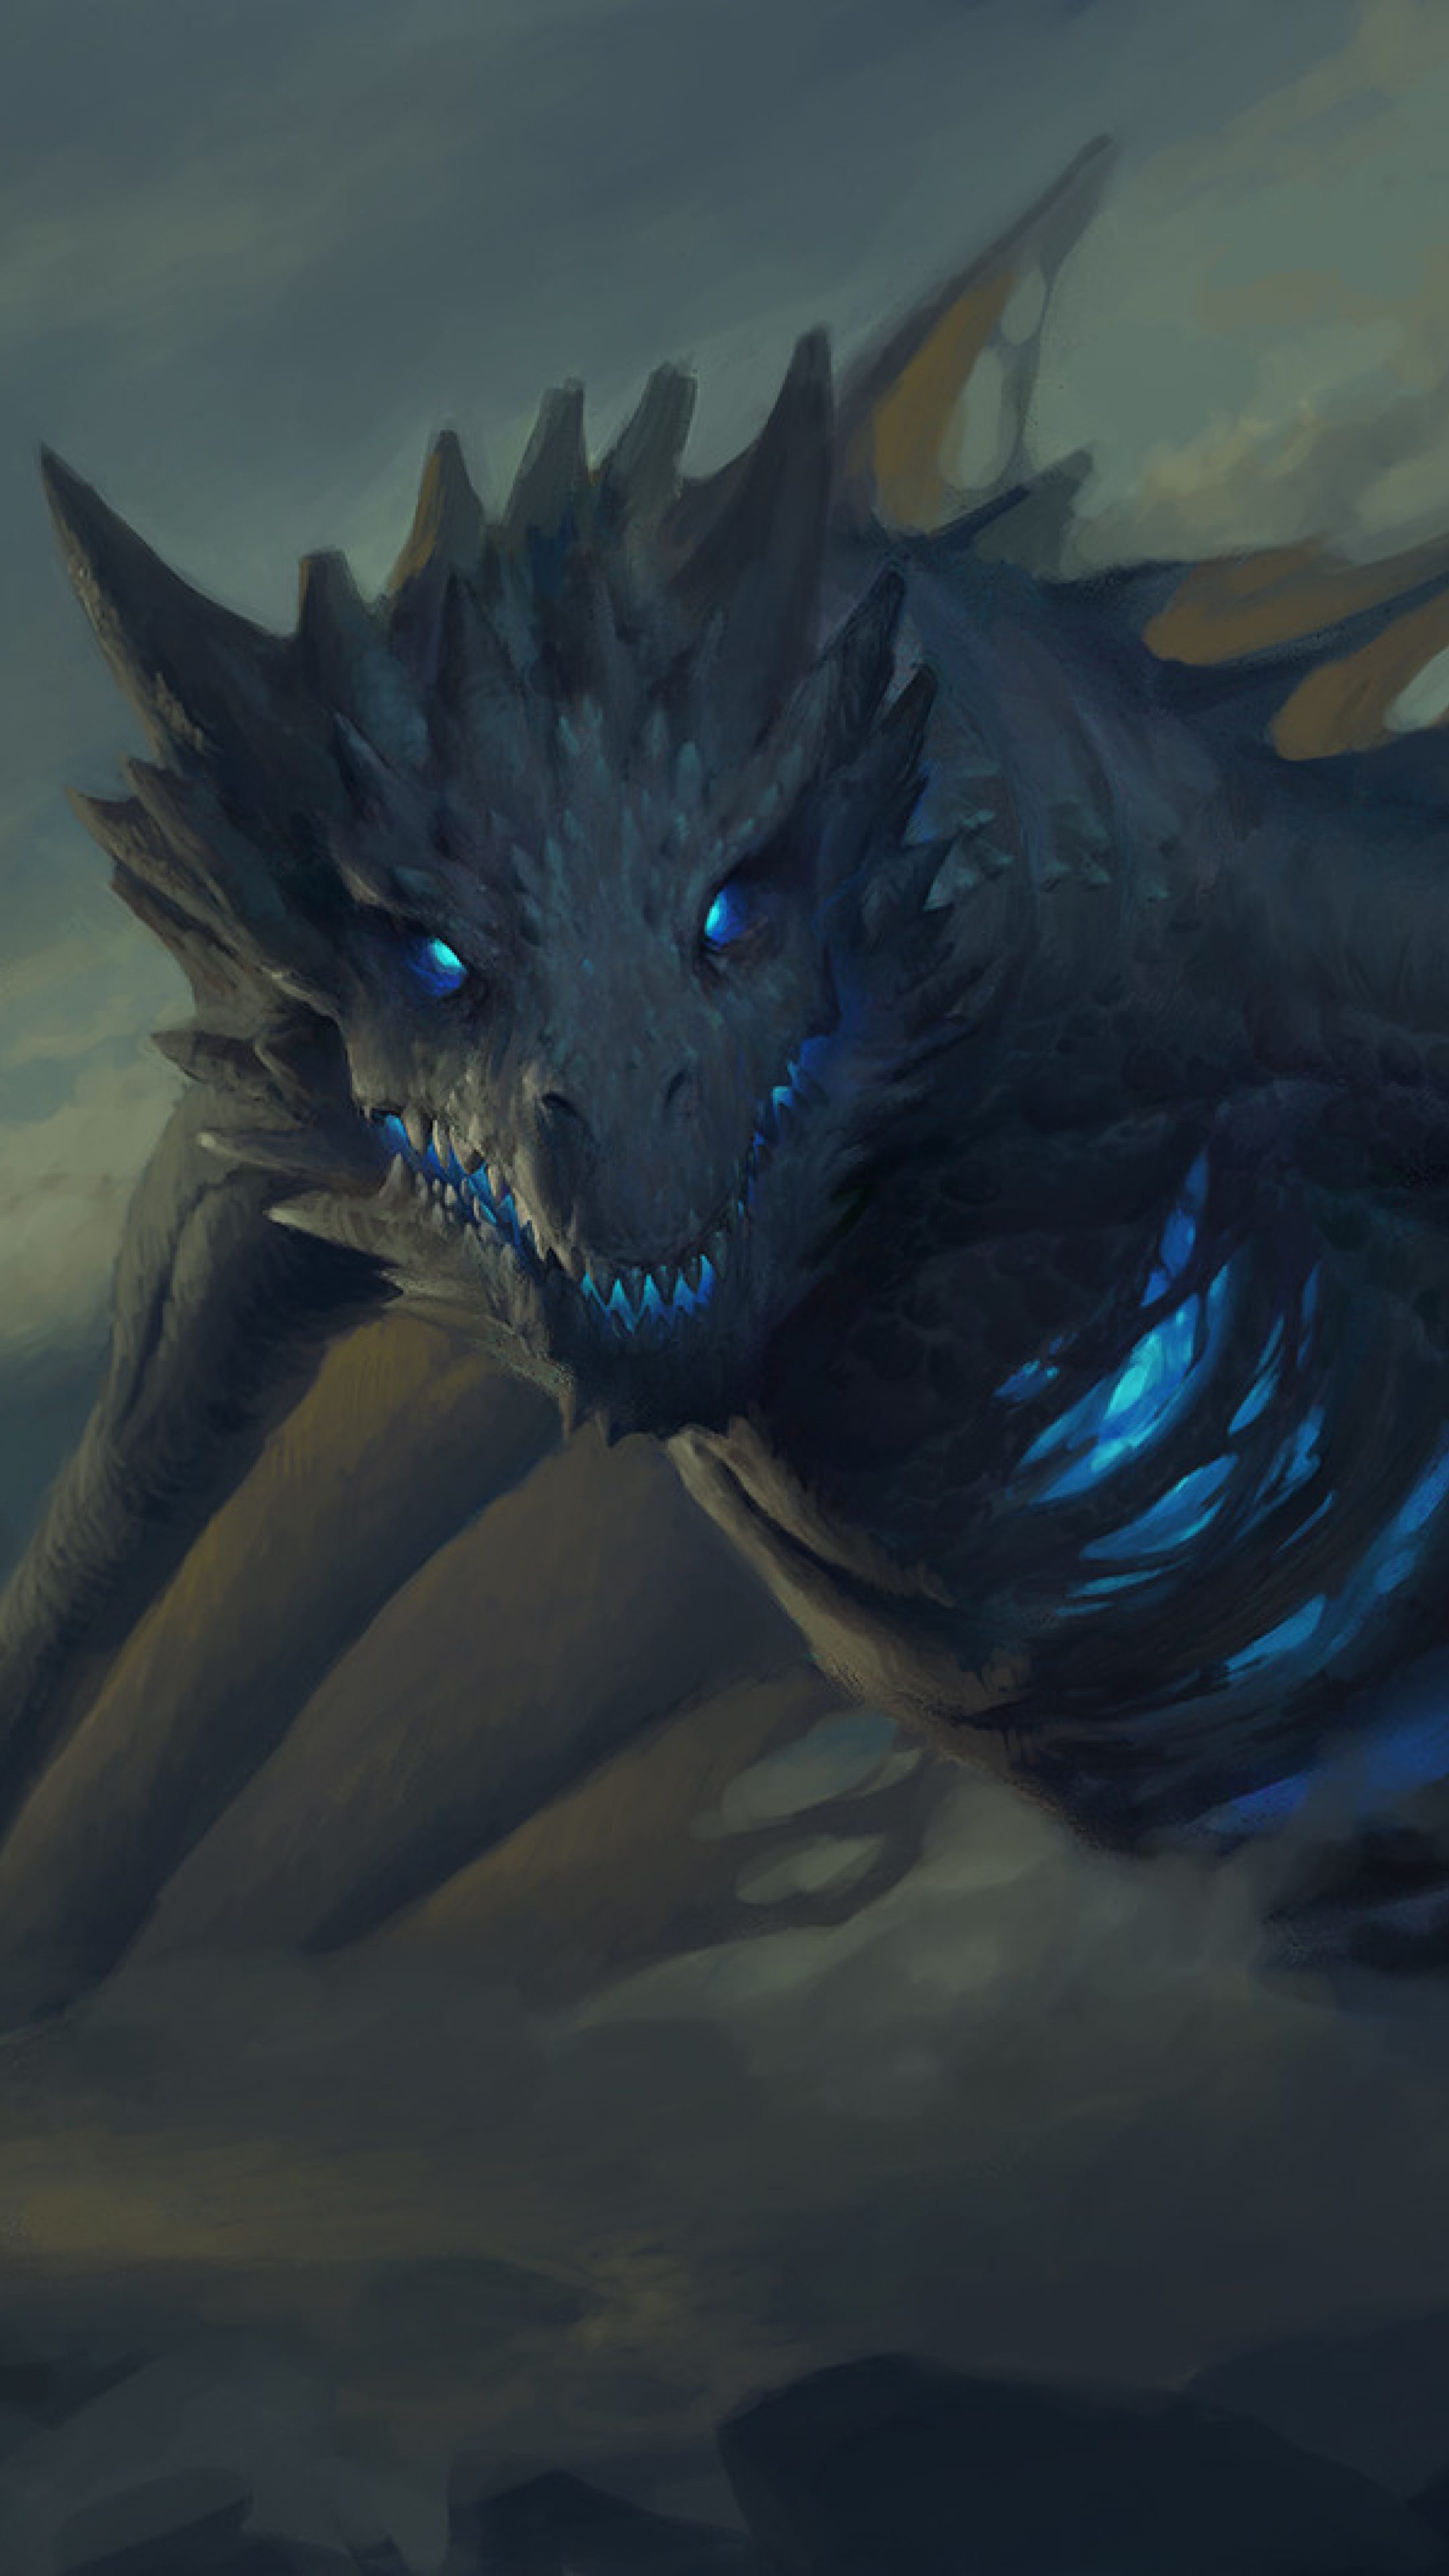 game of thrones full hd wallpapers,dragon,fictional character,mythical creature,cg artwork,black cat